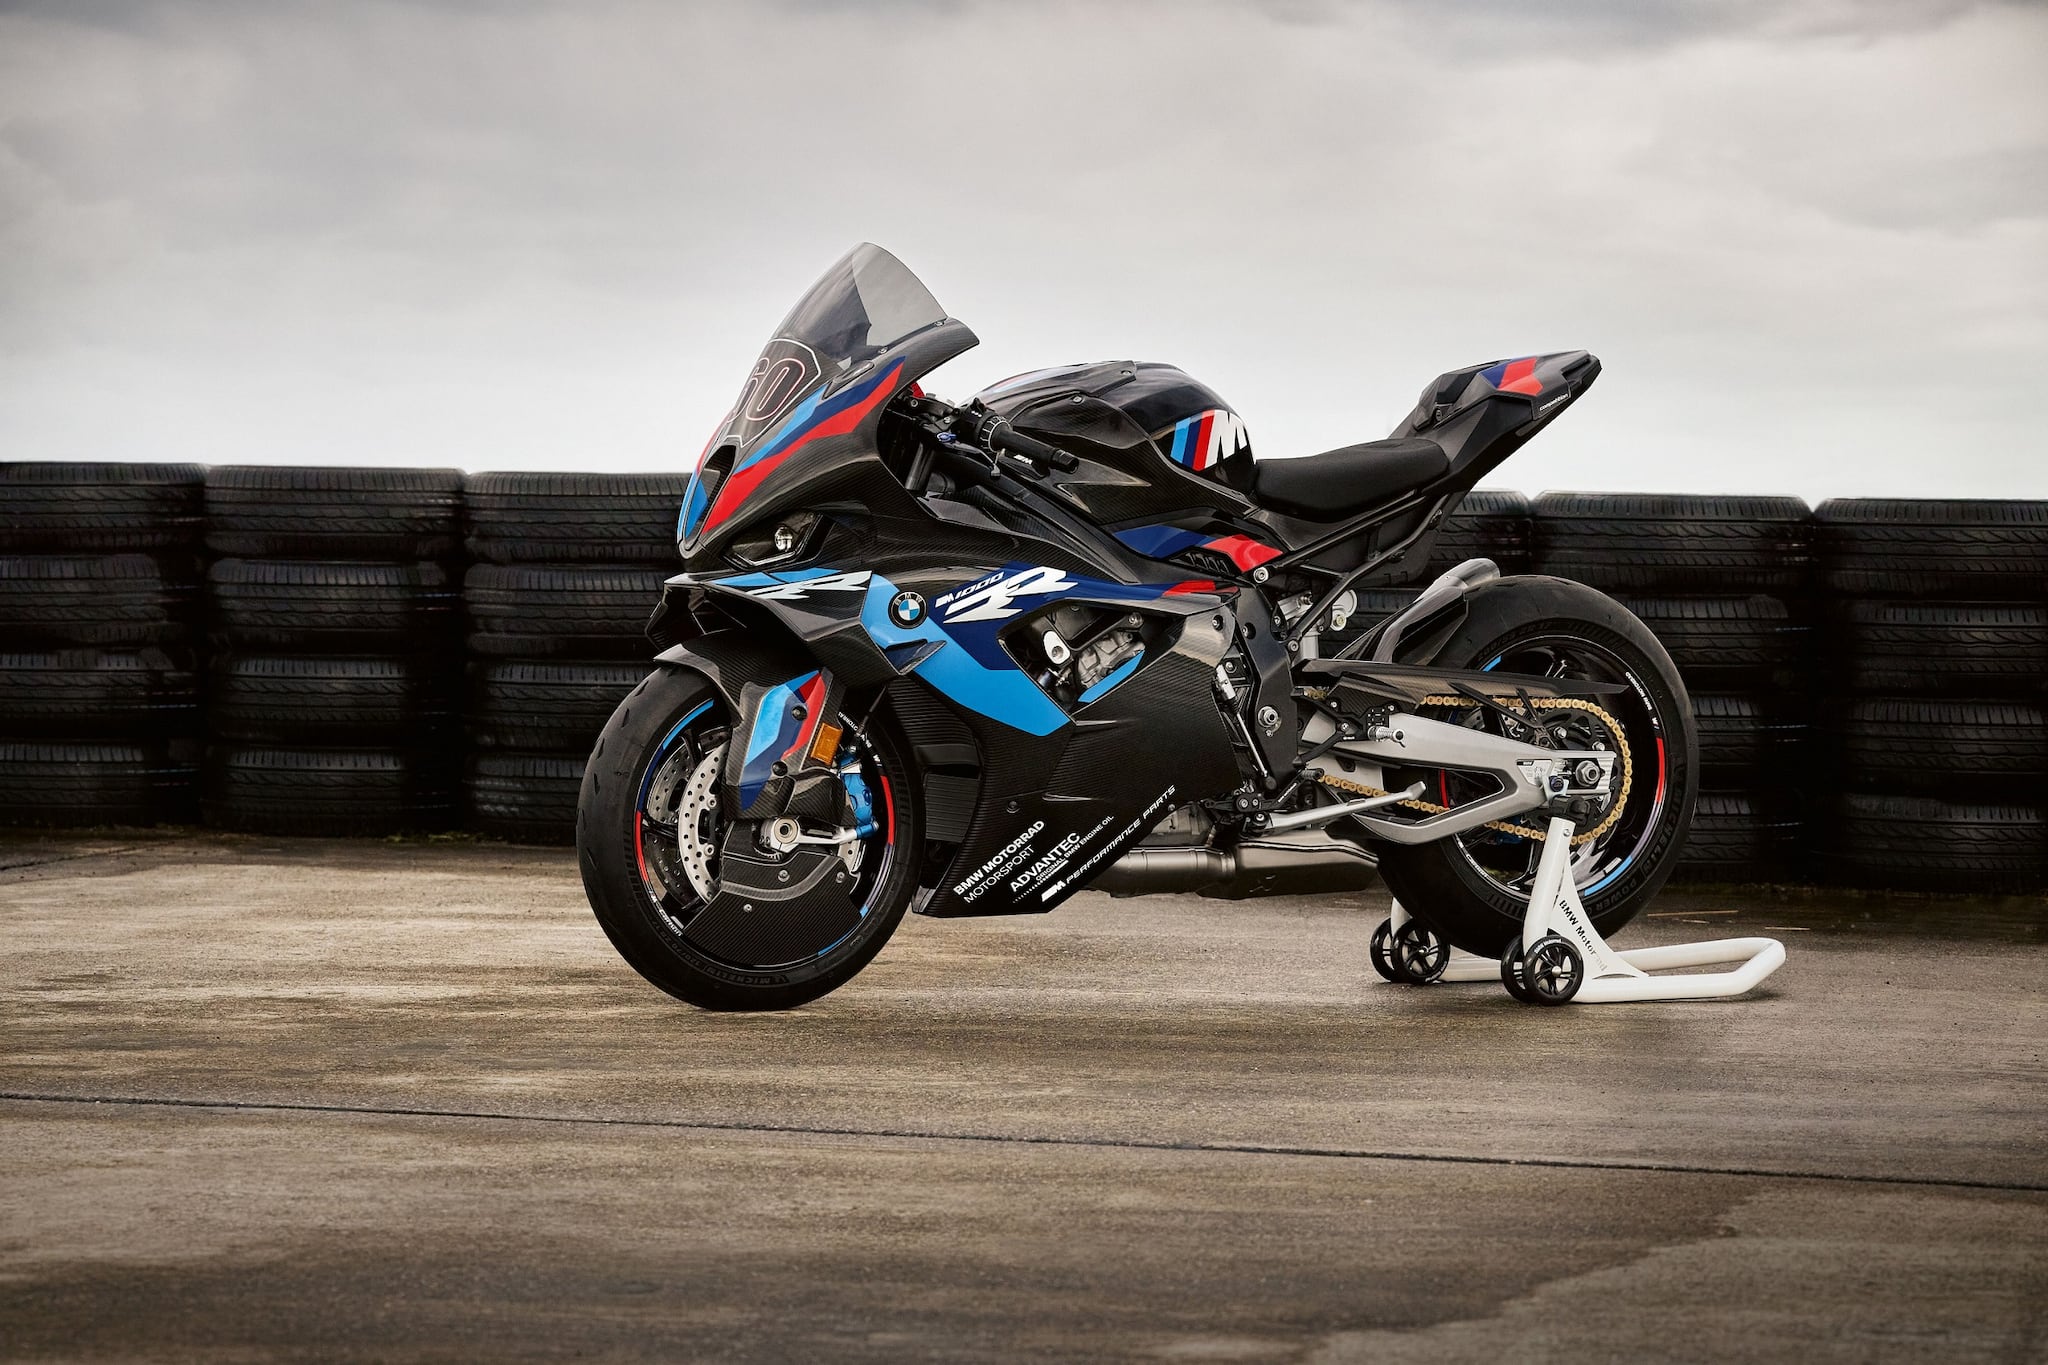 The new motorcycle will be available in two variants at an ex-showroom price. The BMW M 1000 RR is priced at Rs 49,00,000 and tge BMW M 1000 RR Competition is priced at Rs 55,00,000. 